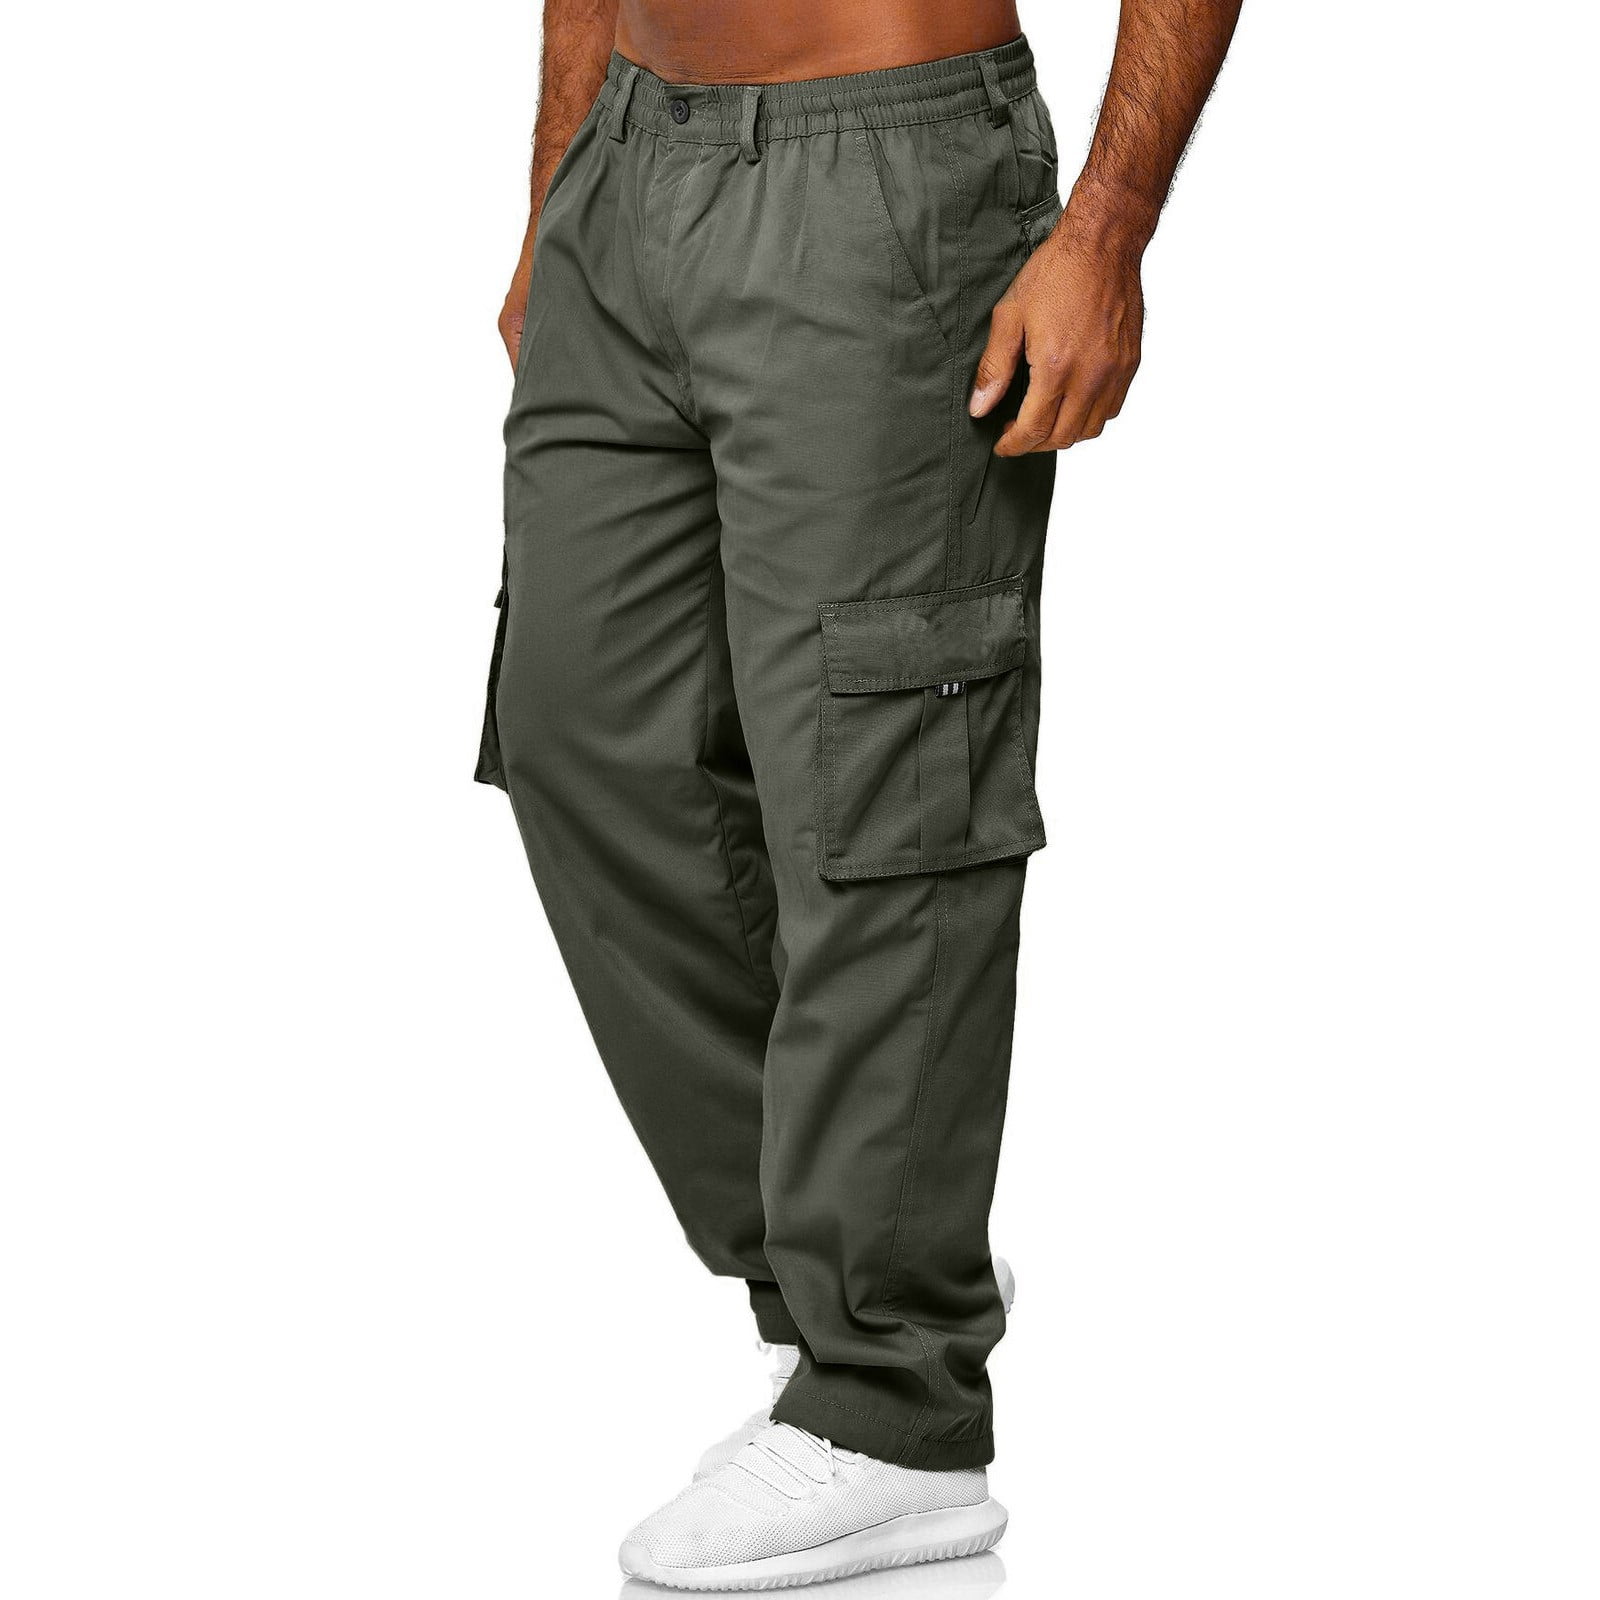 eczipvz Cargo Pants Mens Side Double Streamlines Joggers Pants,Casual Gym  Workout Pants Slim Fit Tapered SweatPants with Zip Pockets White,L -  Walmart.com